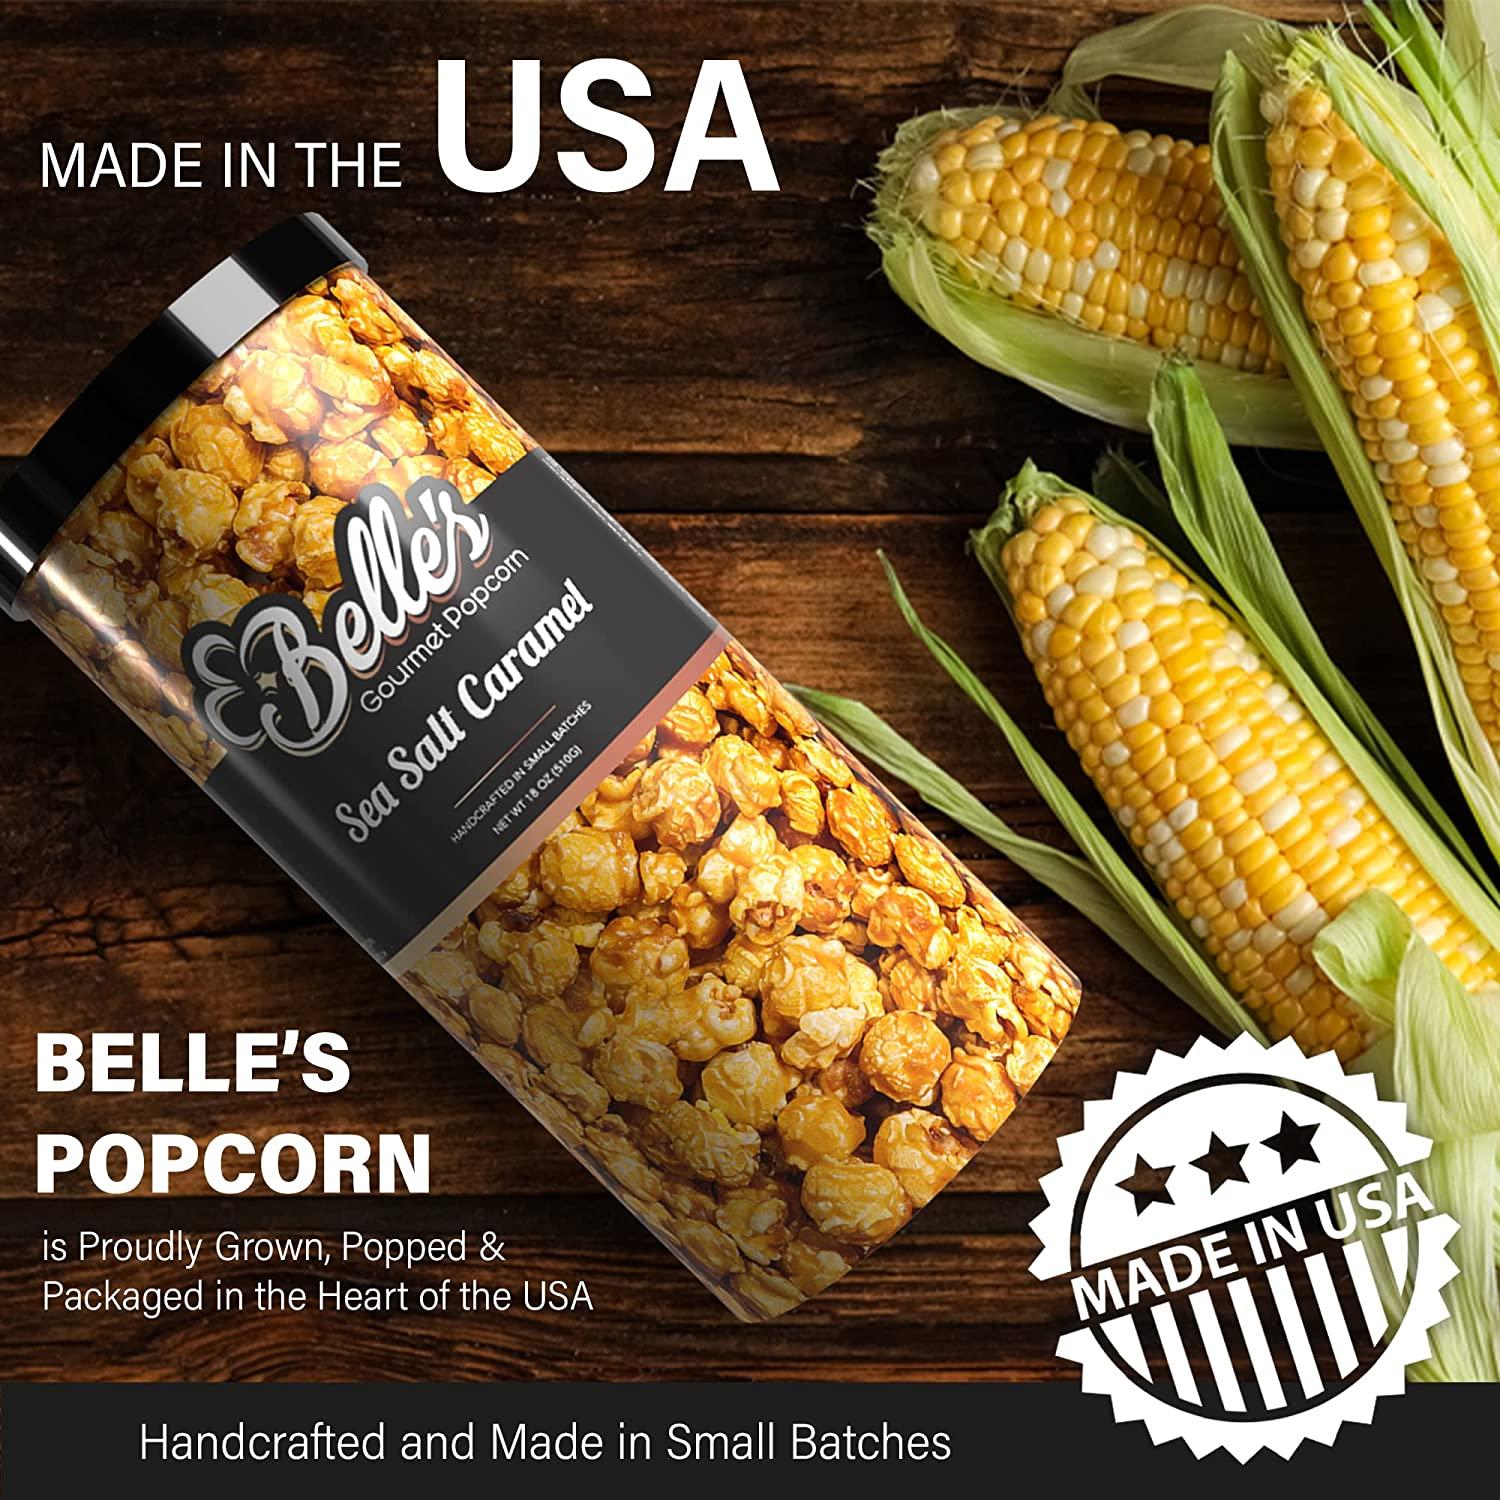 Empty Tins (for Popcorn, Snacks, and Other Uses) – America's Favorite  Gourmet Popcorn